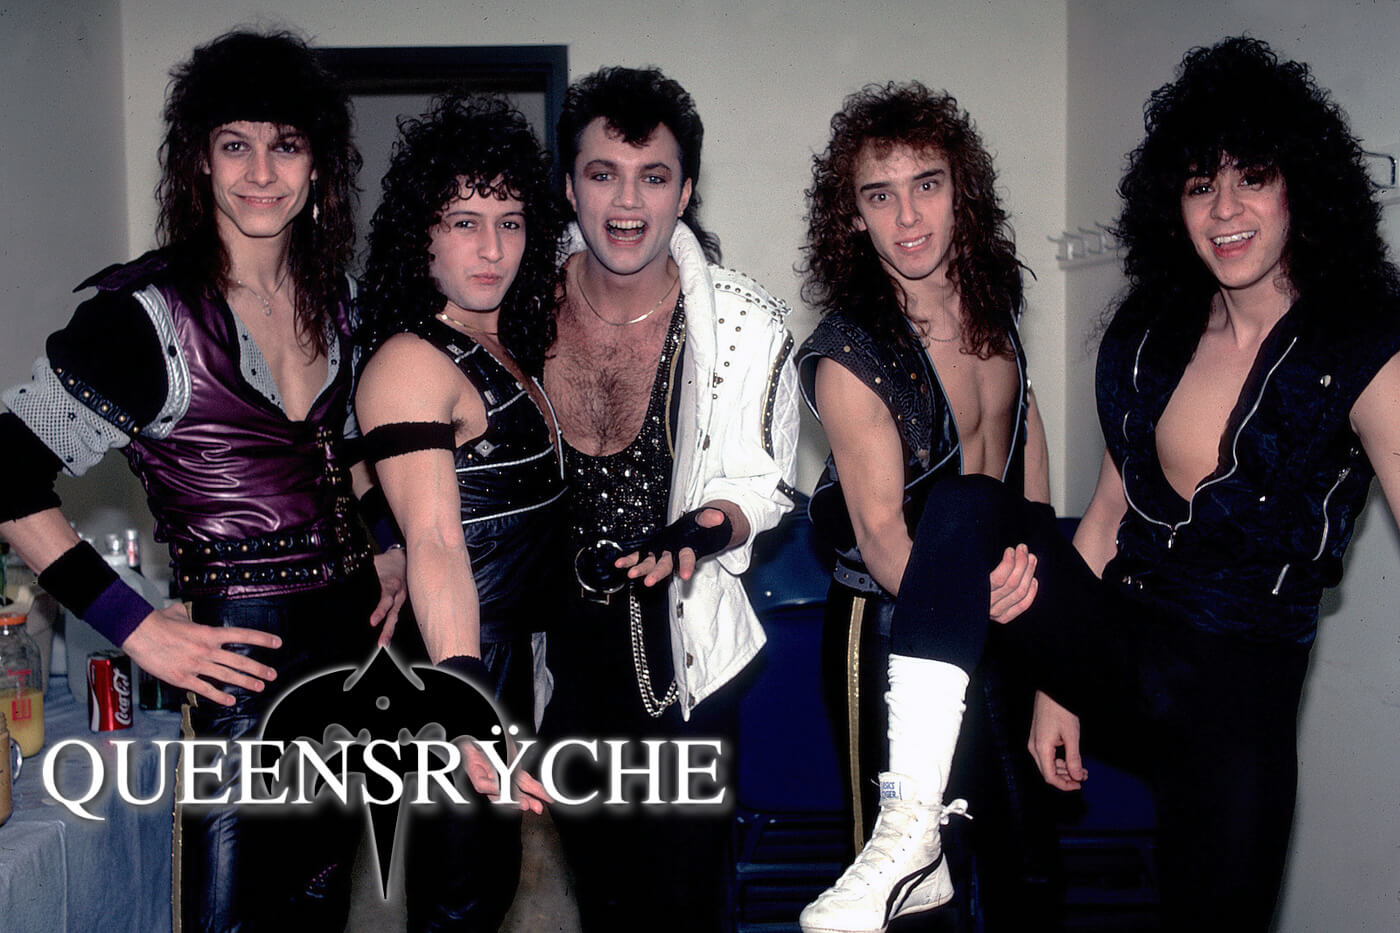 Queensryche band photo cover